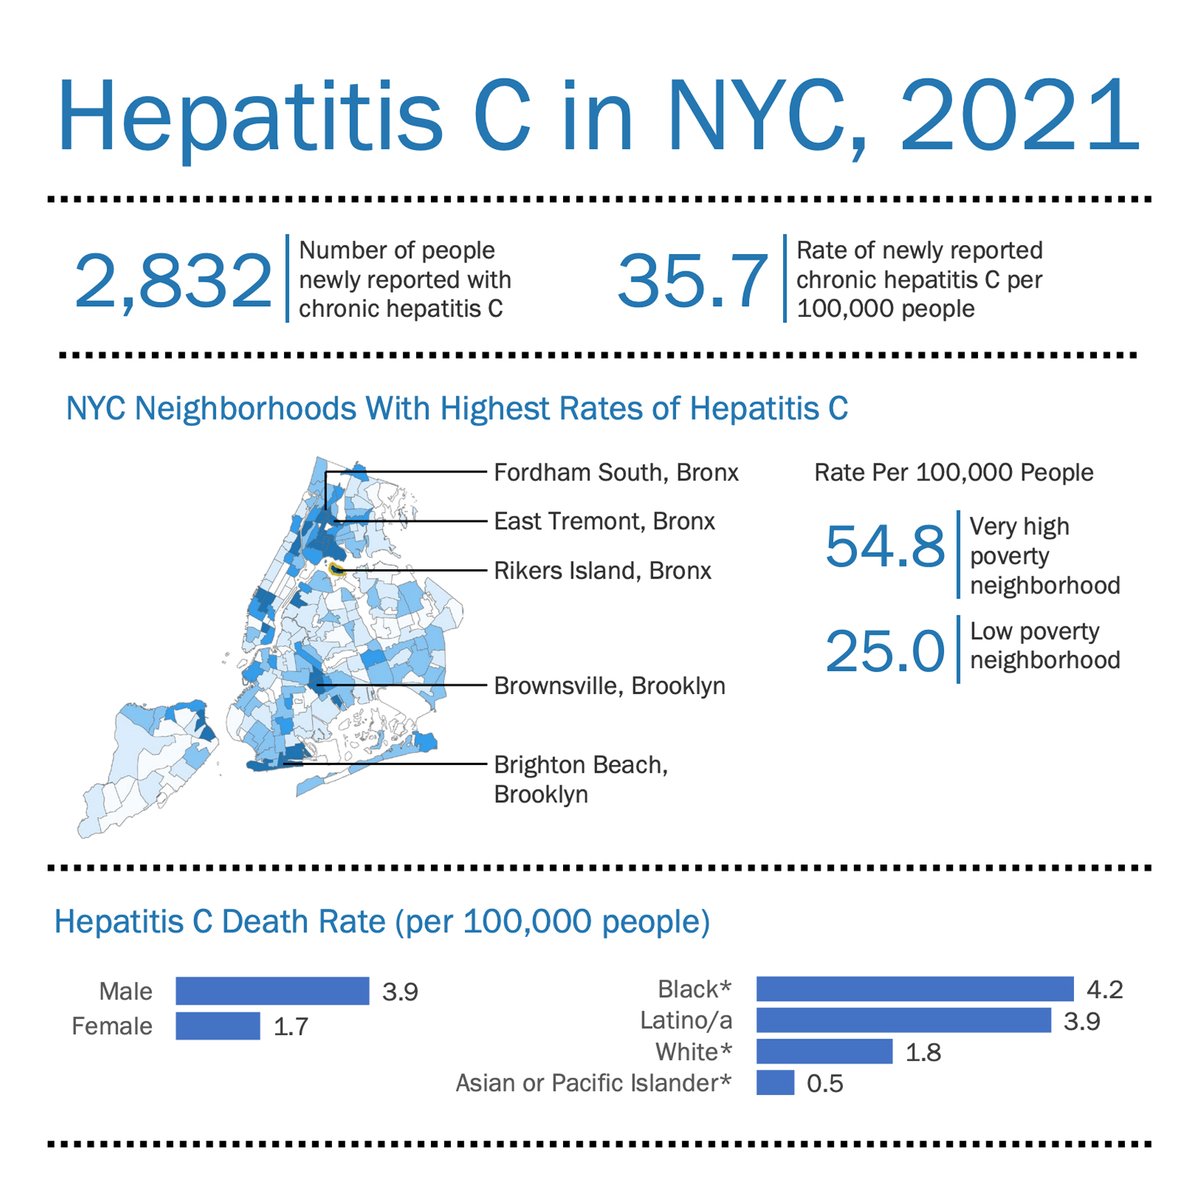 About 329,000 New Yorkers are living with hepatitis B or C, according to our latest report. We’ve expanded services in neighborhoods with high rates to increase treatment for more than 2,200 people living with Hep B and 16,000 people living with Hep C: on.nyc.gov/3HZroLg